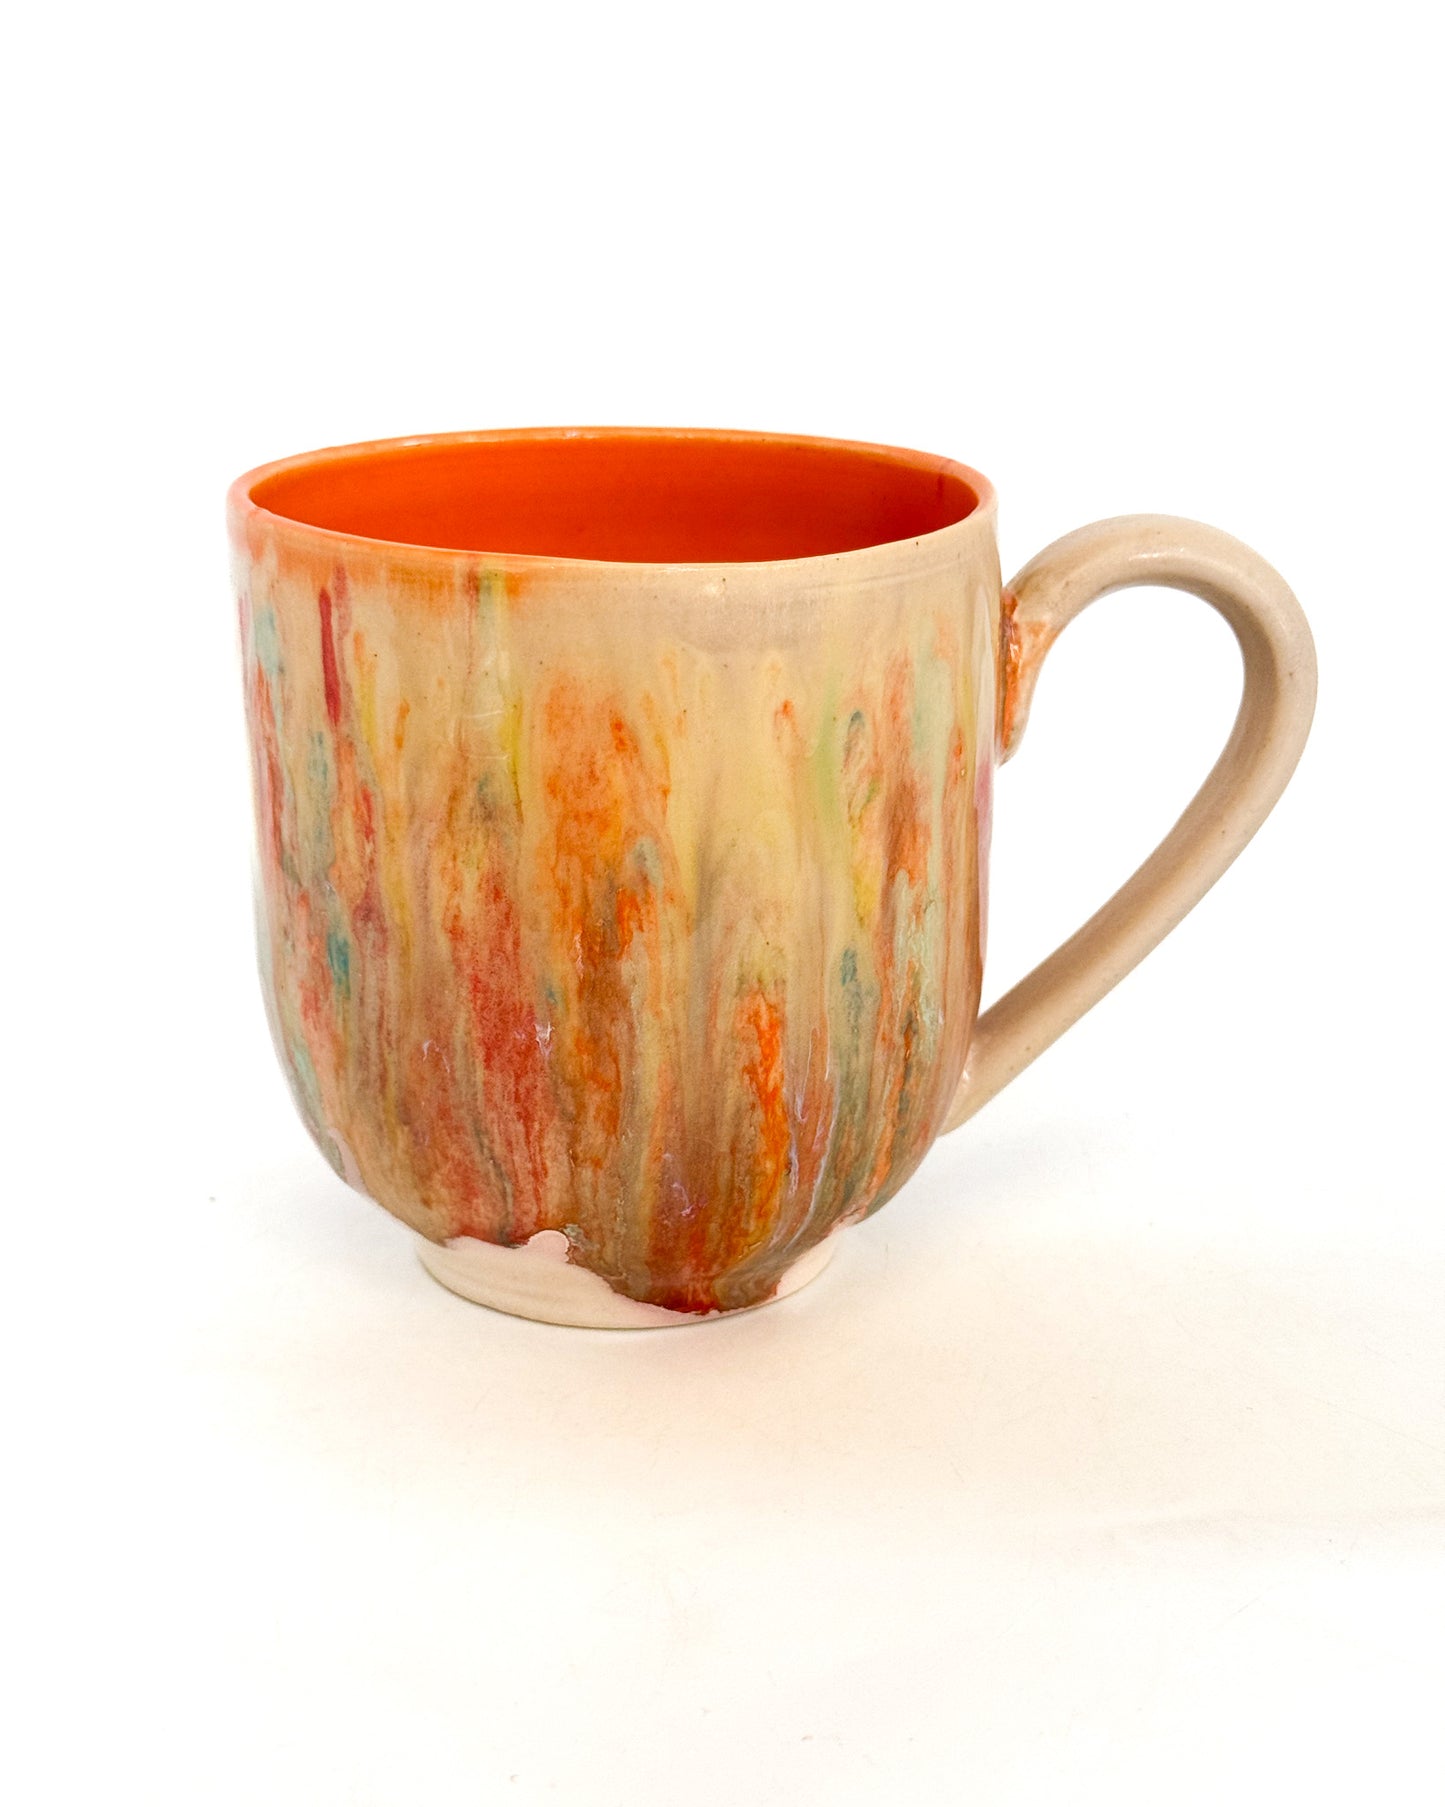 Cryptid Cutie Mug with Sherbert Drips | Lochness Monster with Orange Interior | SECONDS